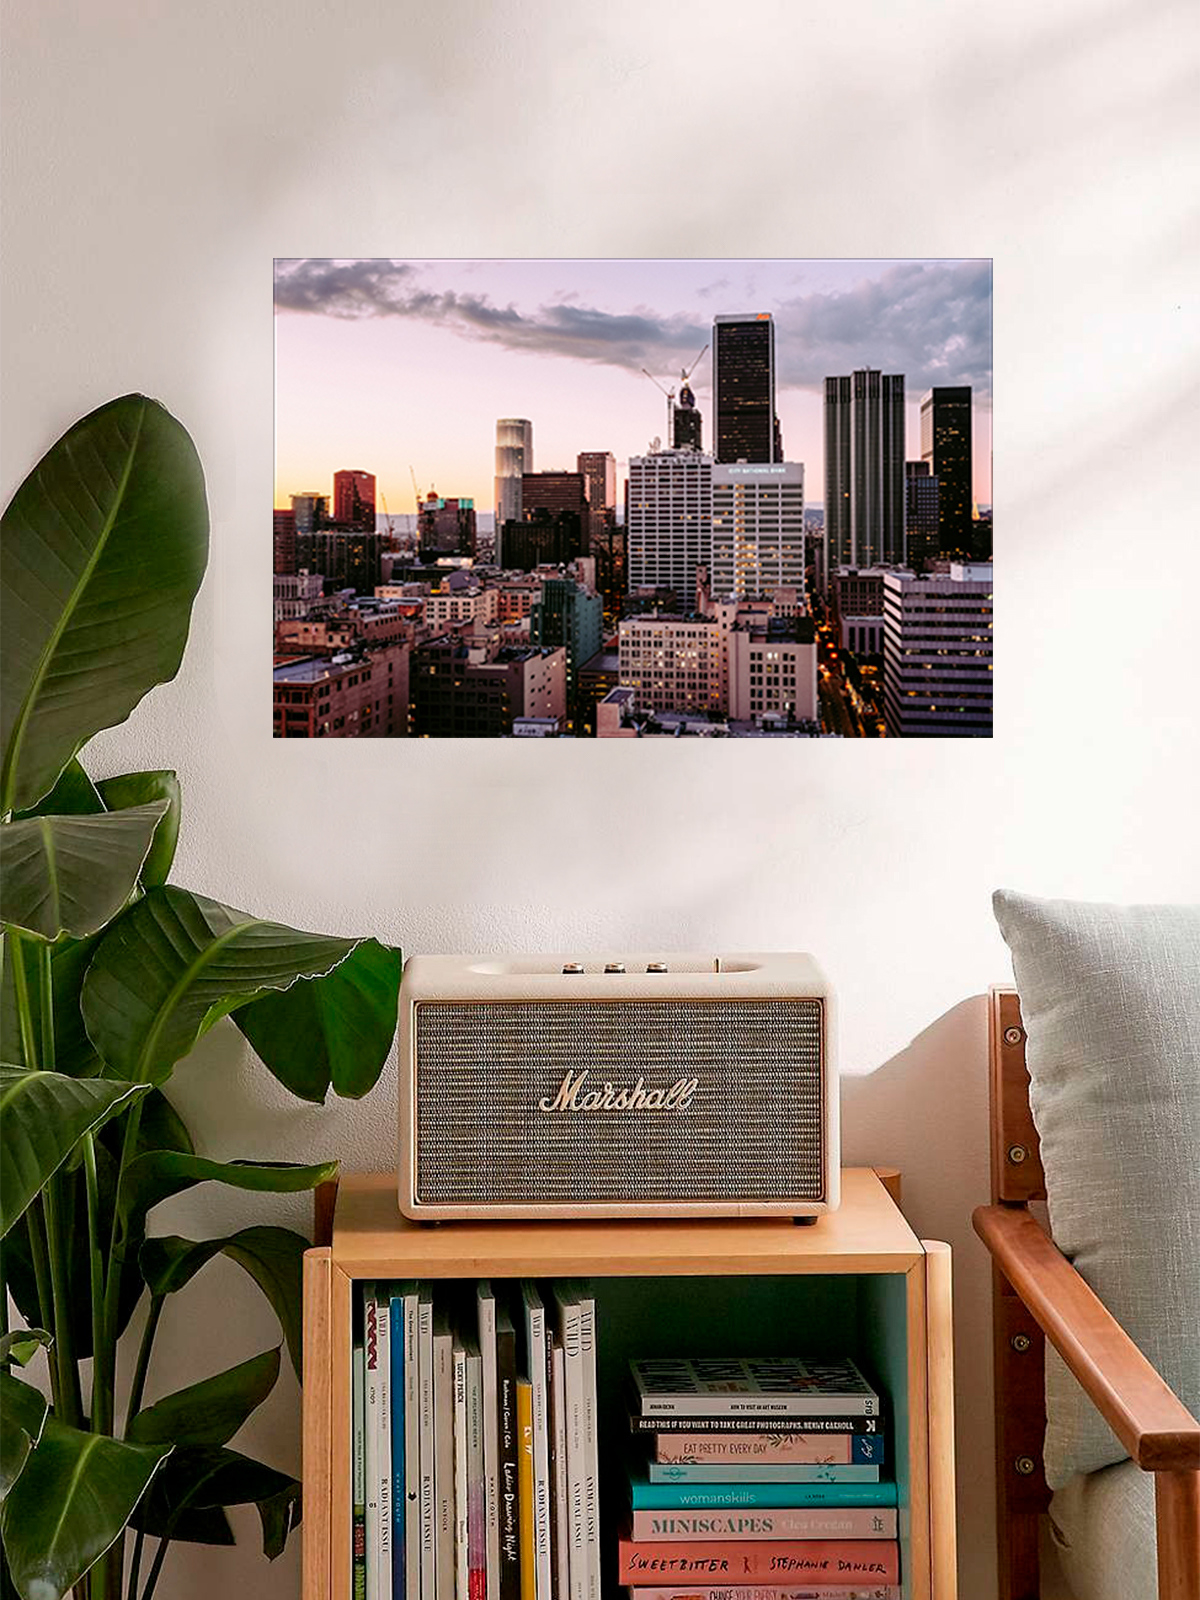 Awkward Styles Urban Poster Collection Urban Wall Art Los Angeles Unframed Artwork LA Poster Decor Los Angeles Cityscape Evening in LA Printed Decor LA Photo Prints LA Cityscape Poster Wall Art - image 2 of 3